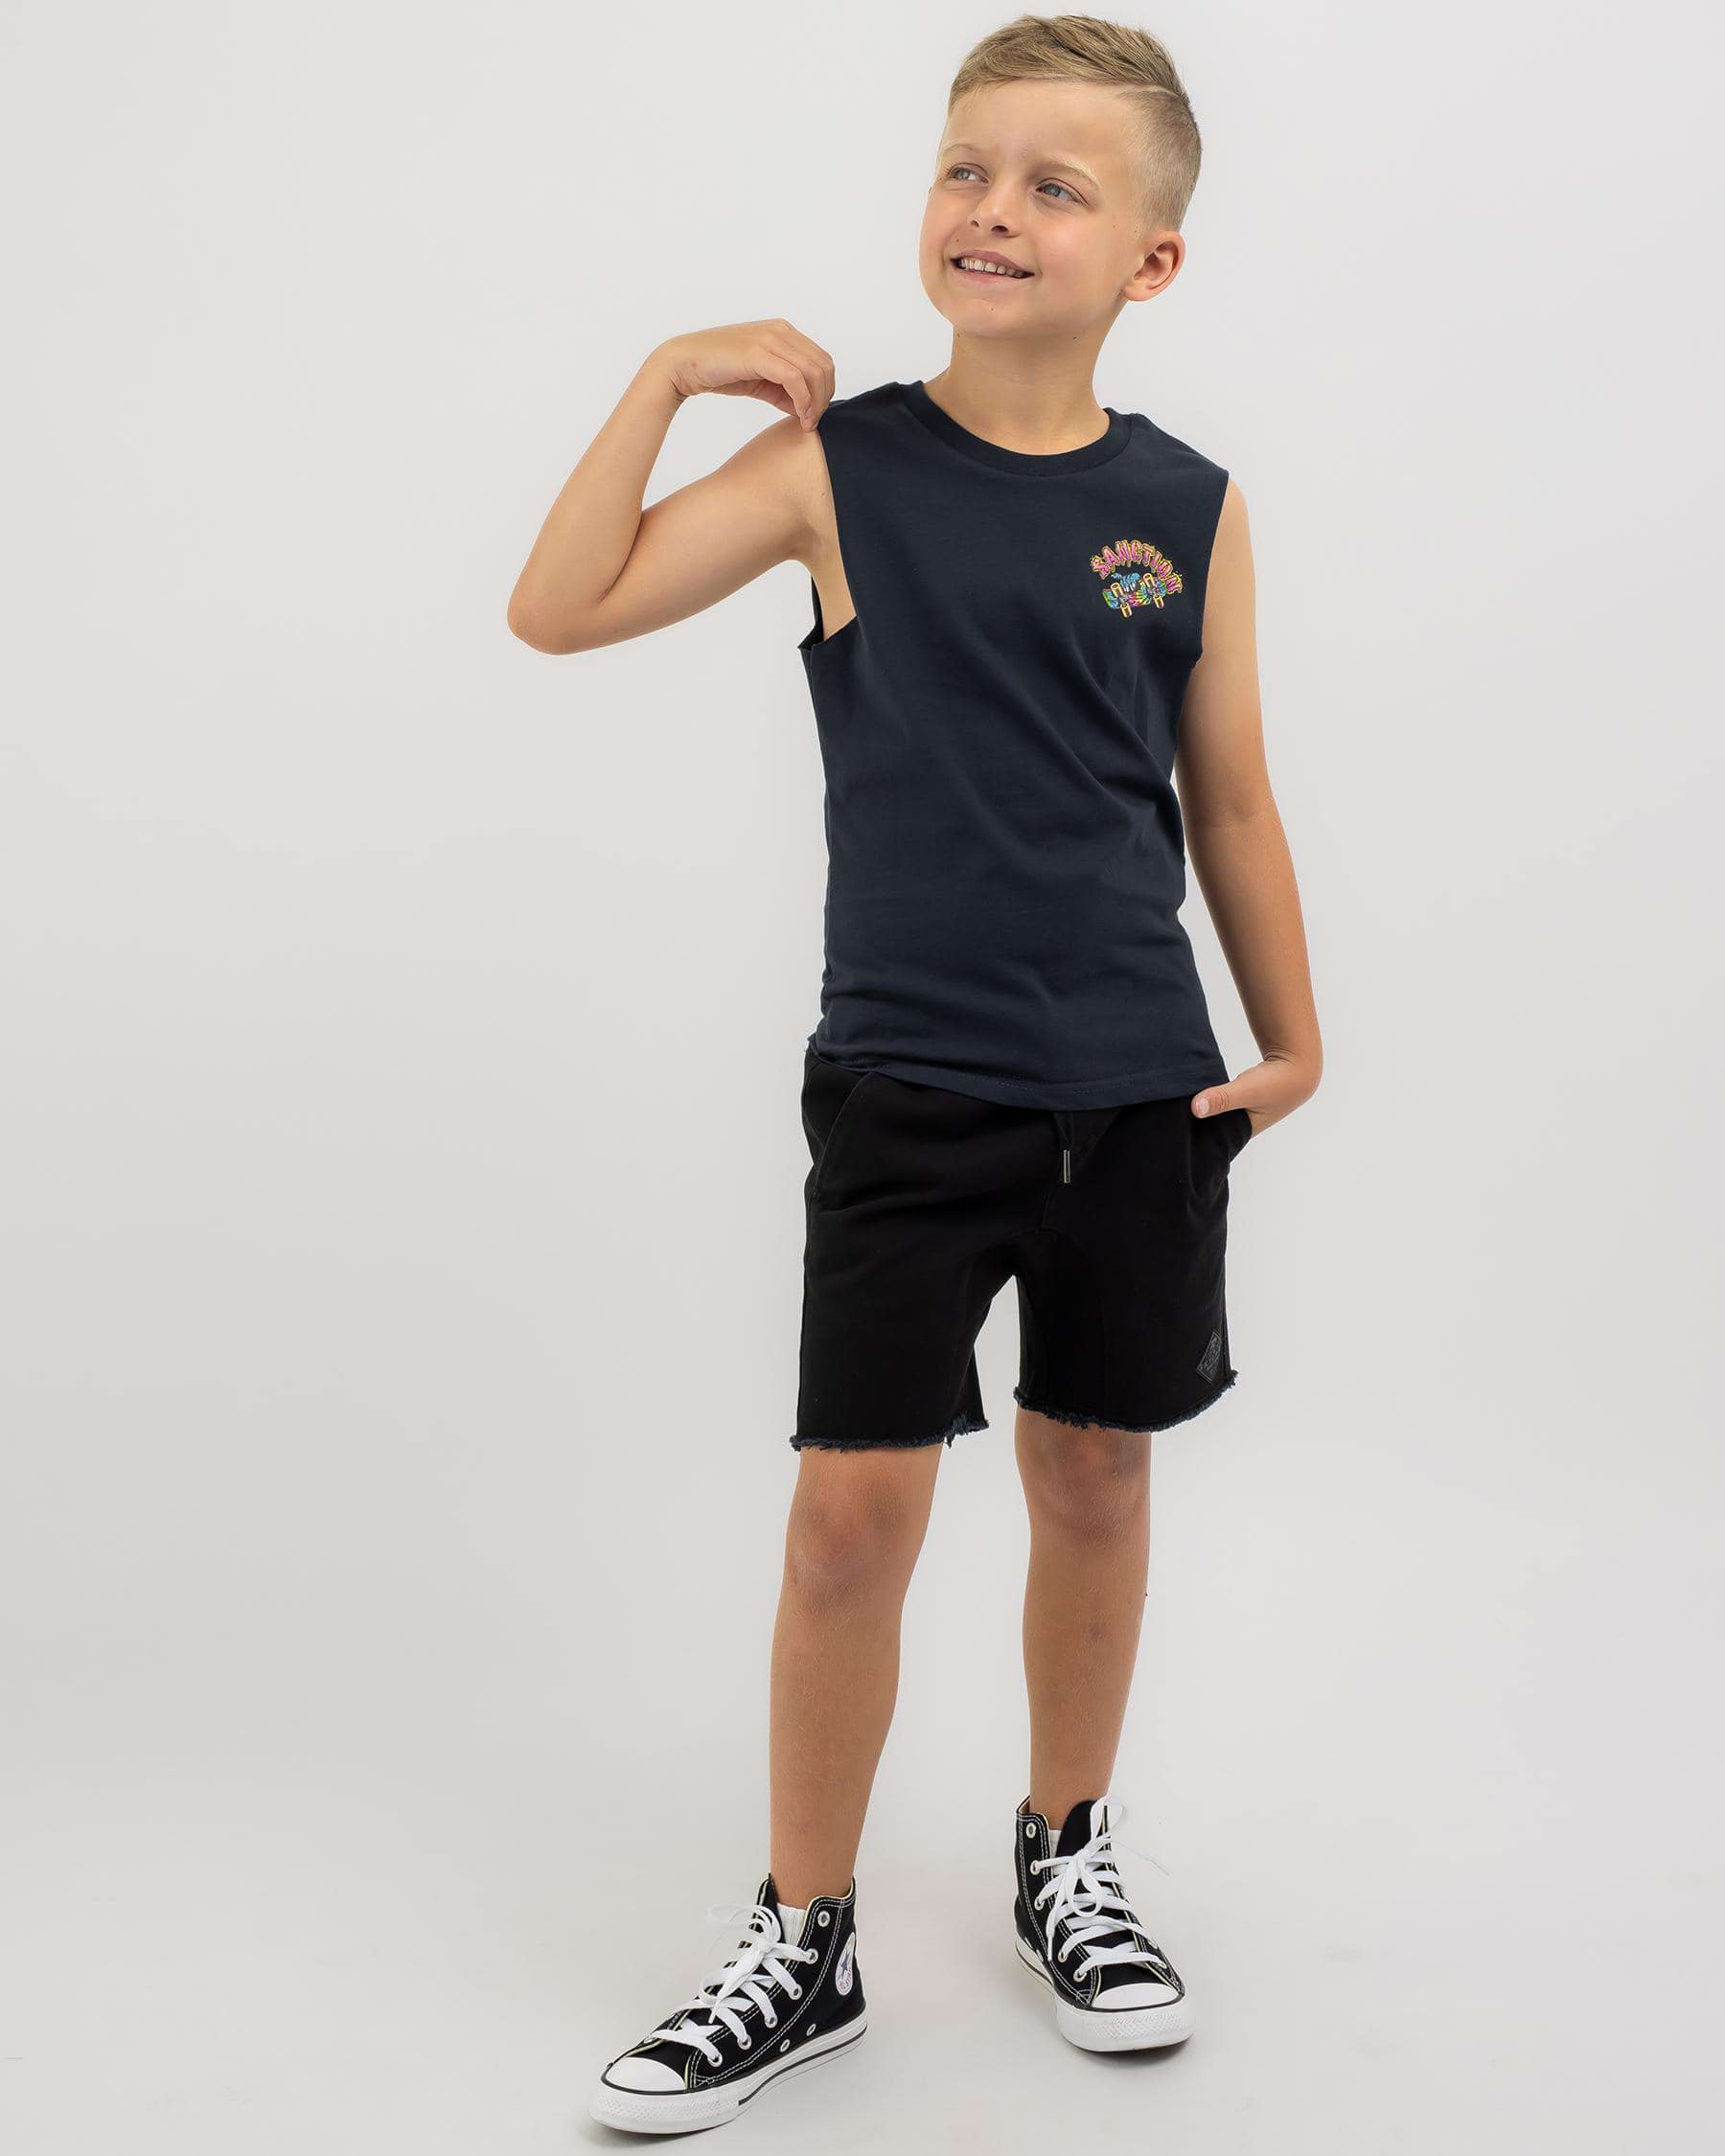 Sanction Toddlers' Sanction Radical Muscle Tank In Navy - Fast Shipping ...